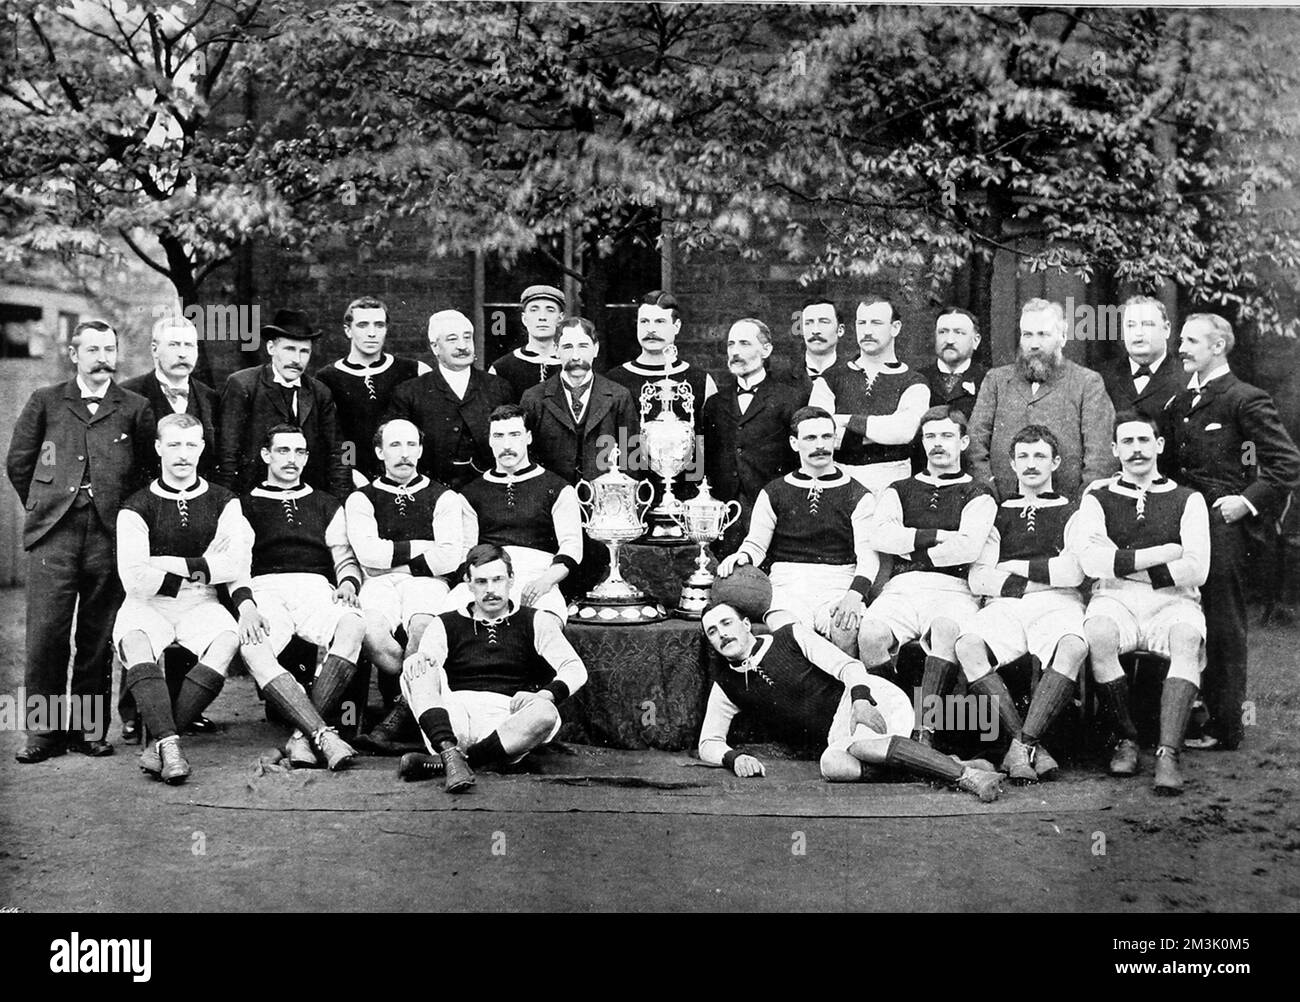 Aston Villa Football Club, with the team for the 1896-1897 season.  The photograph shows:  Back row, left to right: G.B. Ramsay (Secretary), Dr. V.A. Jones, J.Grierson (Trainer), H.Spencer, F.Cooper, T.Wilkes, J. Ansell (President), D. Hodgetts, J.E. Margoschis (Chairman), C.S. Johnstone, J. Welford, I. Whitehouse, W. McGregor, J.T. Lees, F.W. Rinder. Middle row, seated, left to right: R. Chatt, J.W. Crabtree, J. Reynolds, Jas. Cowan, J. Devey (Captain), F. Burton, D. Athersmith, J. Campbell. Front row, on ground, left to right: S. Smith, John Cowan.  1896 Stock Photo